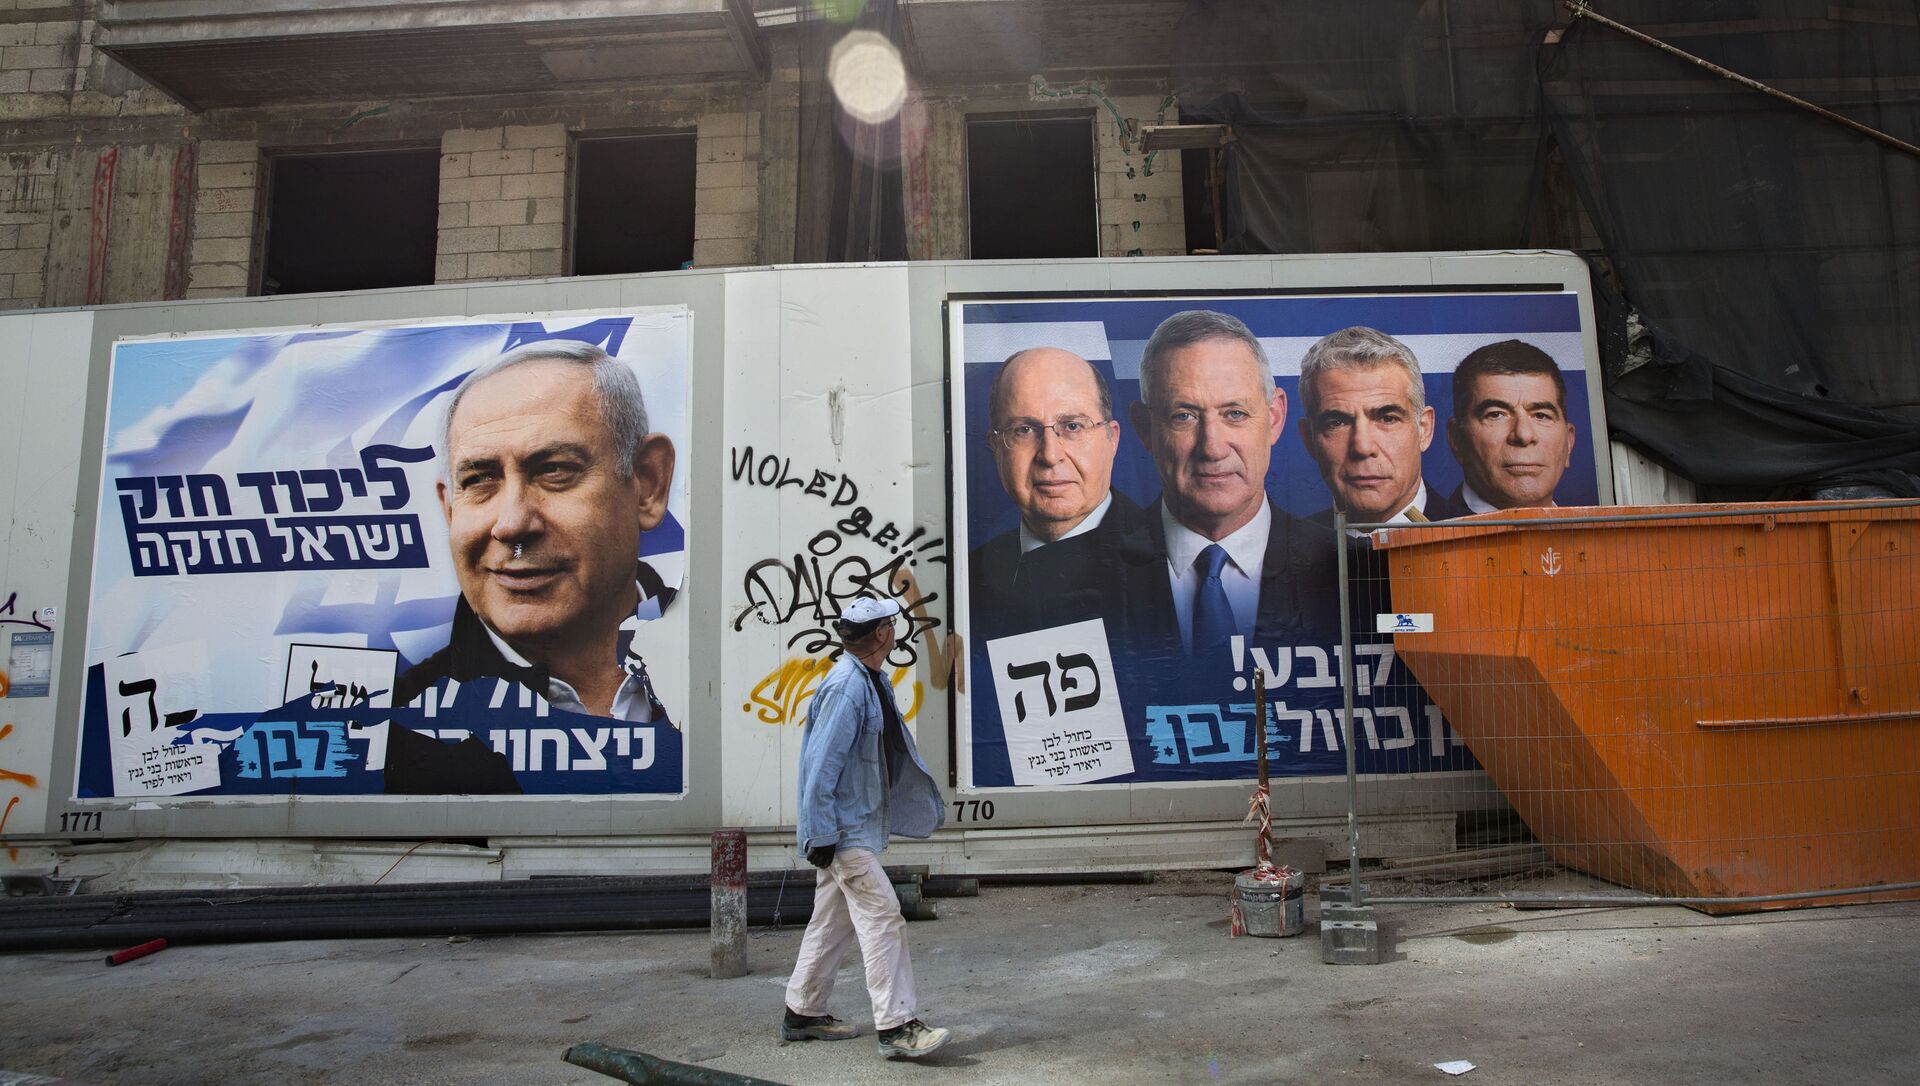 A man walks by election campaign billboards showing Israeli Prime Minister and head of the Likud party Benjamin Netanyahu, left, alongside the Blue and White party leaders, from left to right, Moshe Yaalon, Benny Gantz, Yair Lapid and Gabi Ashkenazi, in Tel Aviv, Israel, Sunday, April 7, 2019. Hebrew on billboards reads, left Strong Likud strong Israel on the right Every vote matters, win Blue and White. (AP Photo/Oded Balilty) - Sputnik Afrique, 1920, 02.06.2021